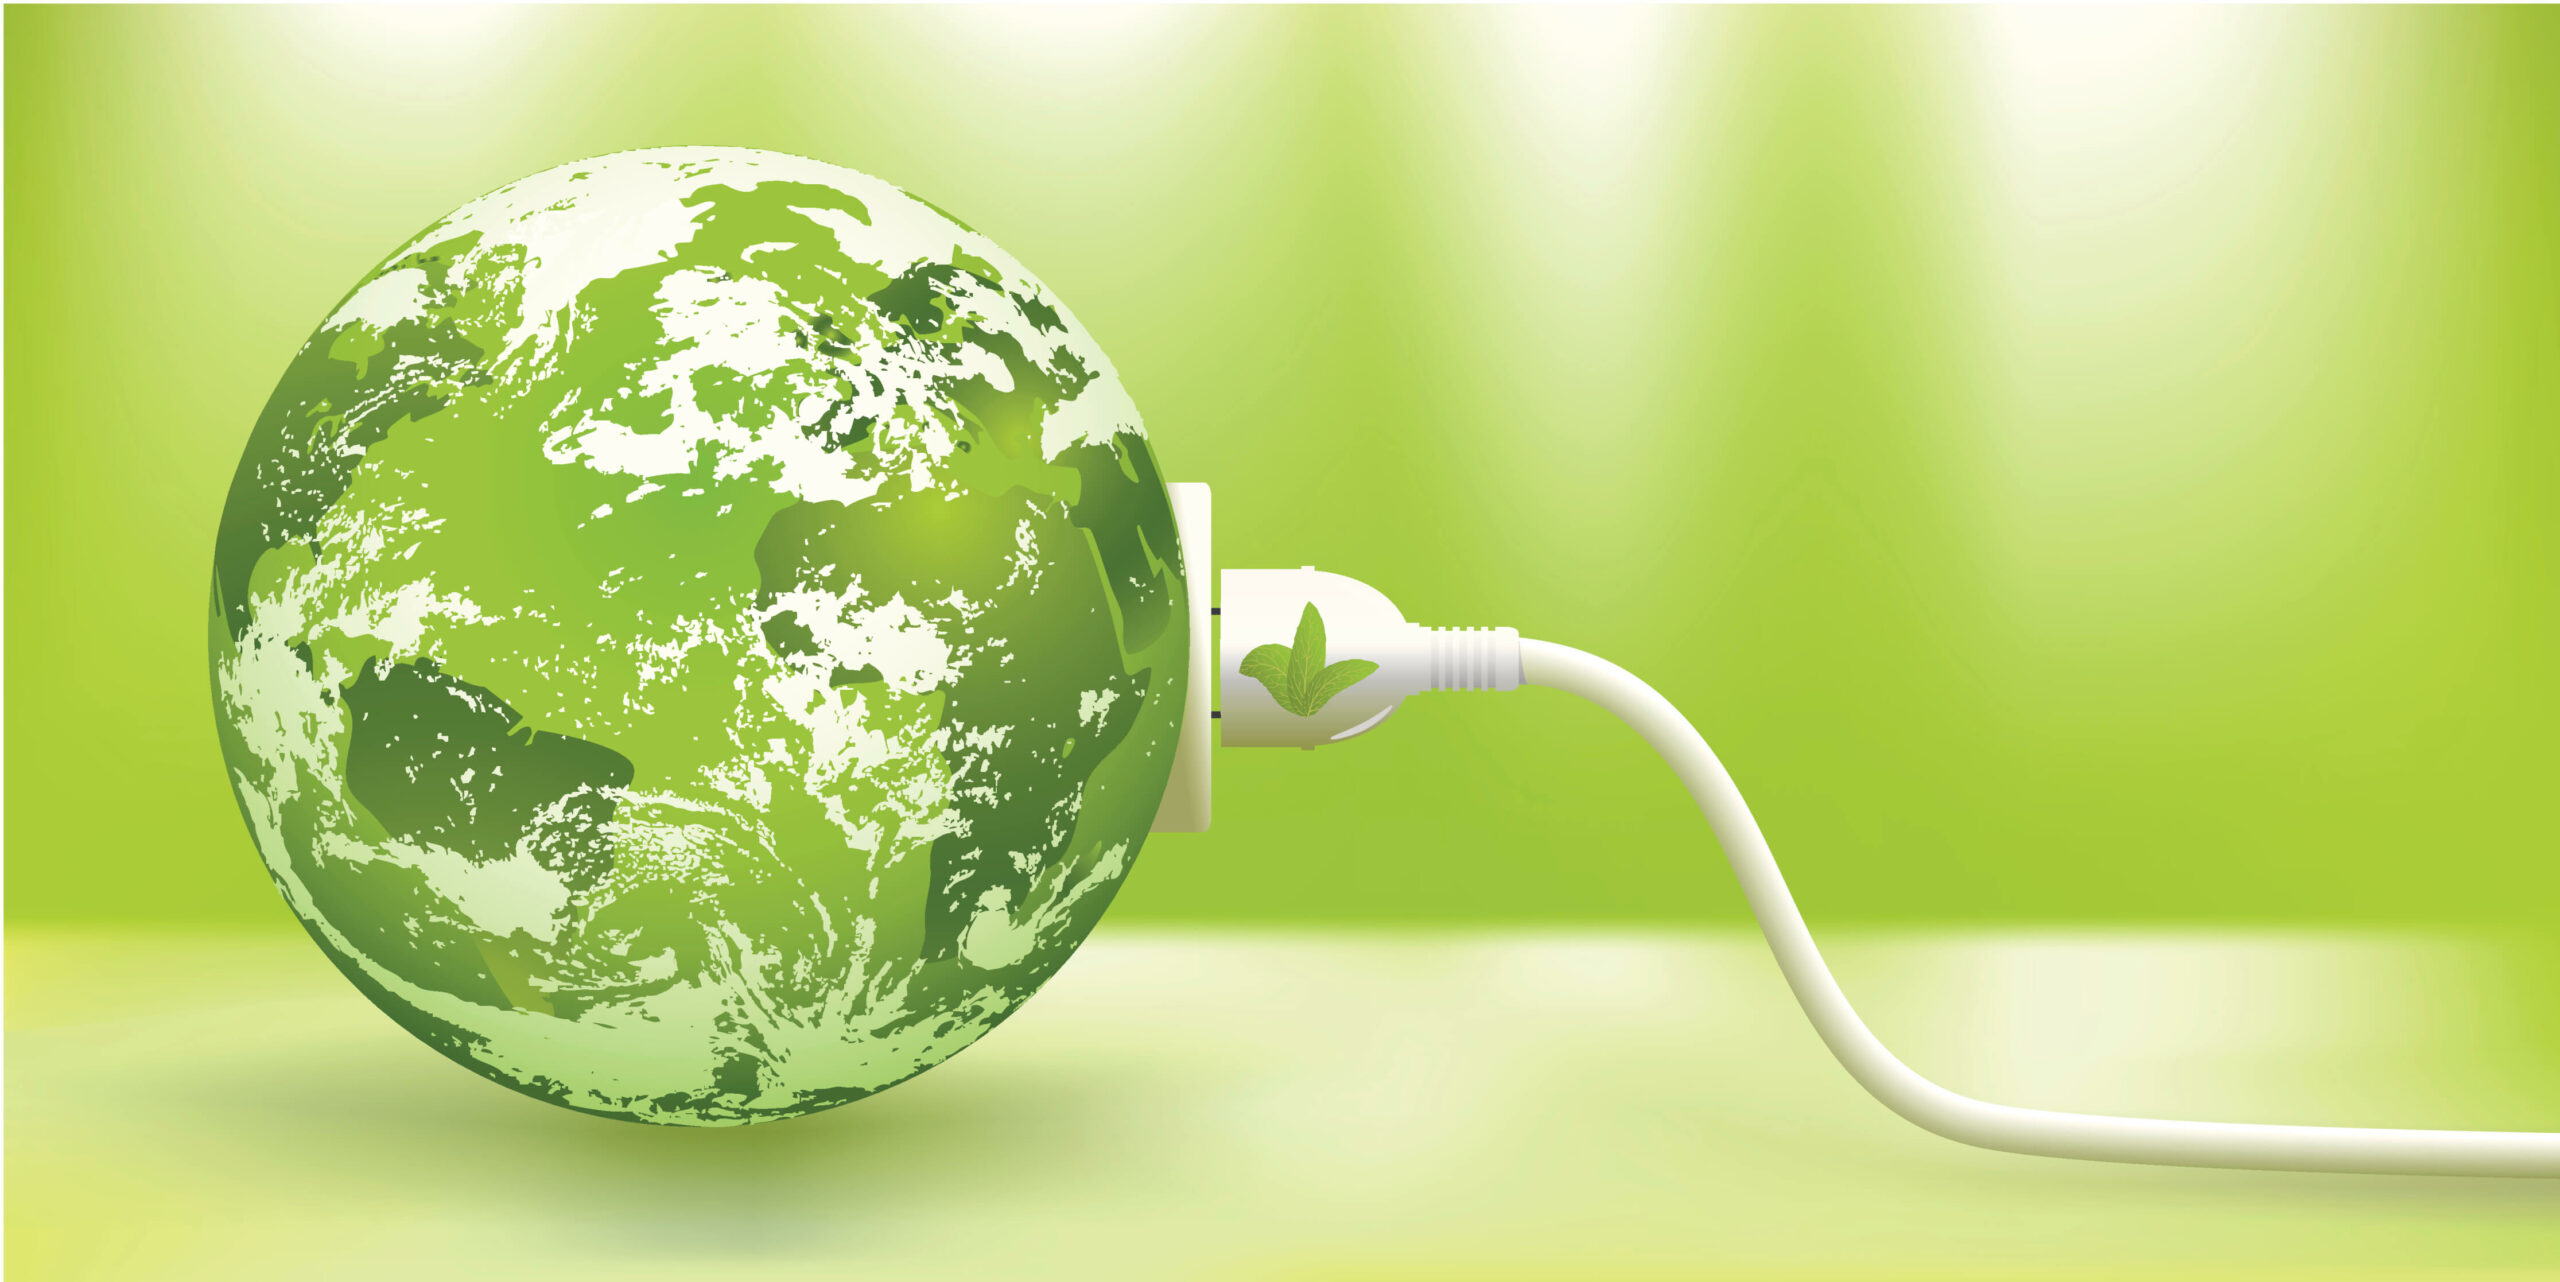 10 Simple Ways to Conserve Electricity